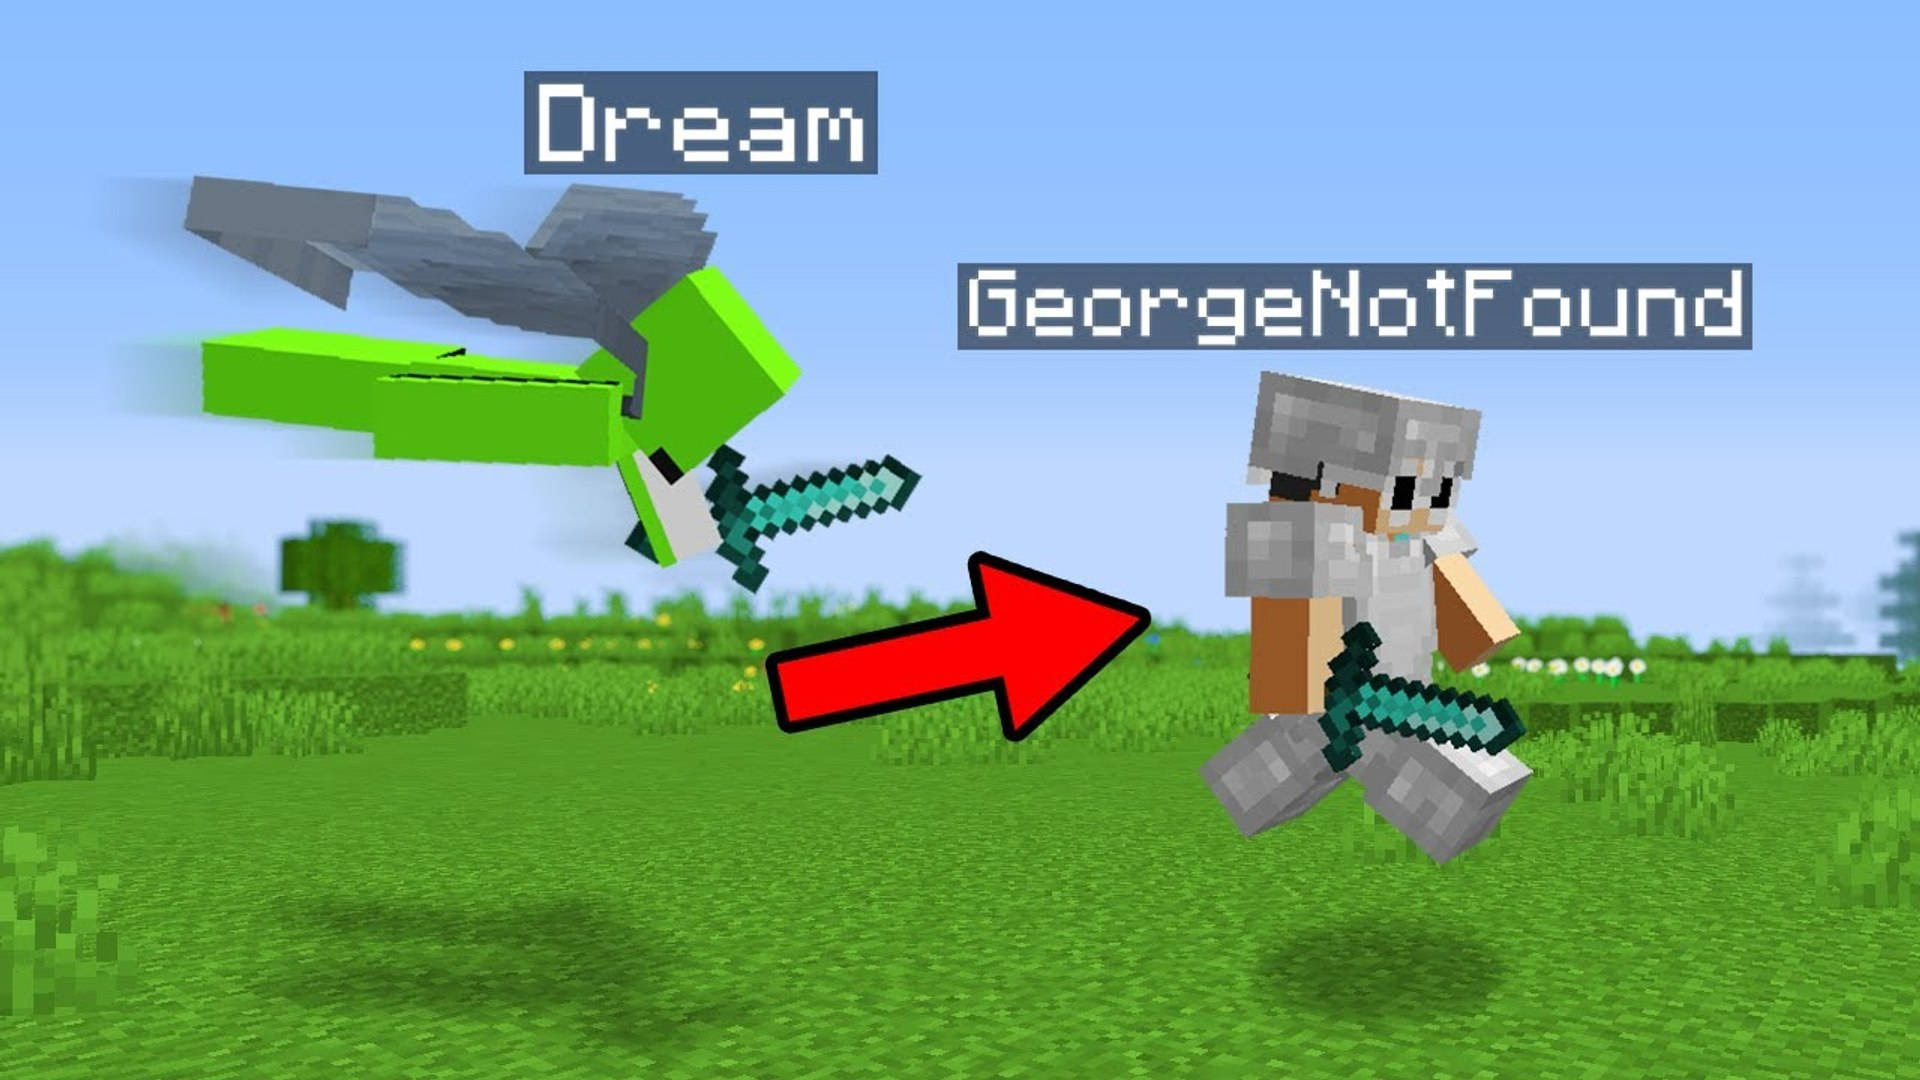 Download minecraft dream and george not found wallpaper